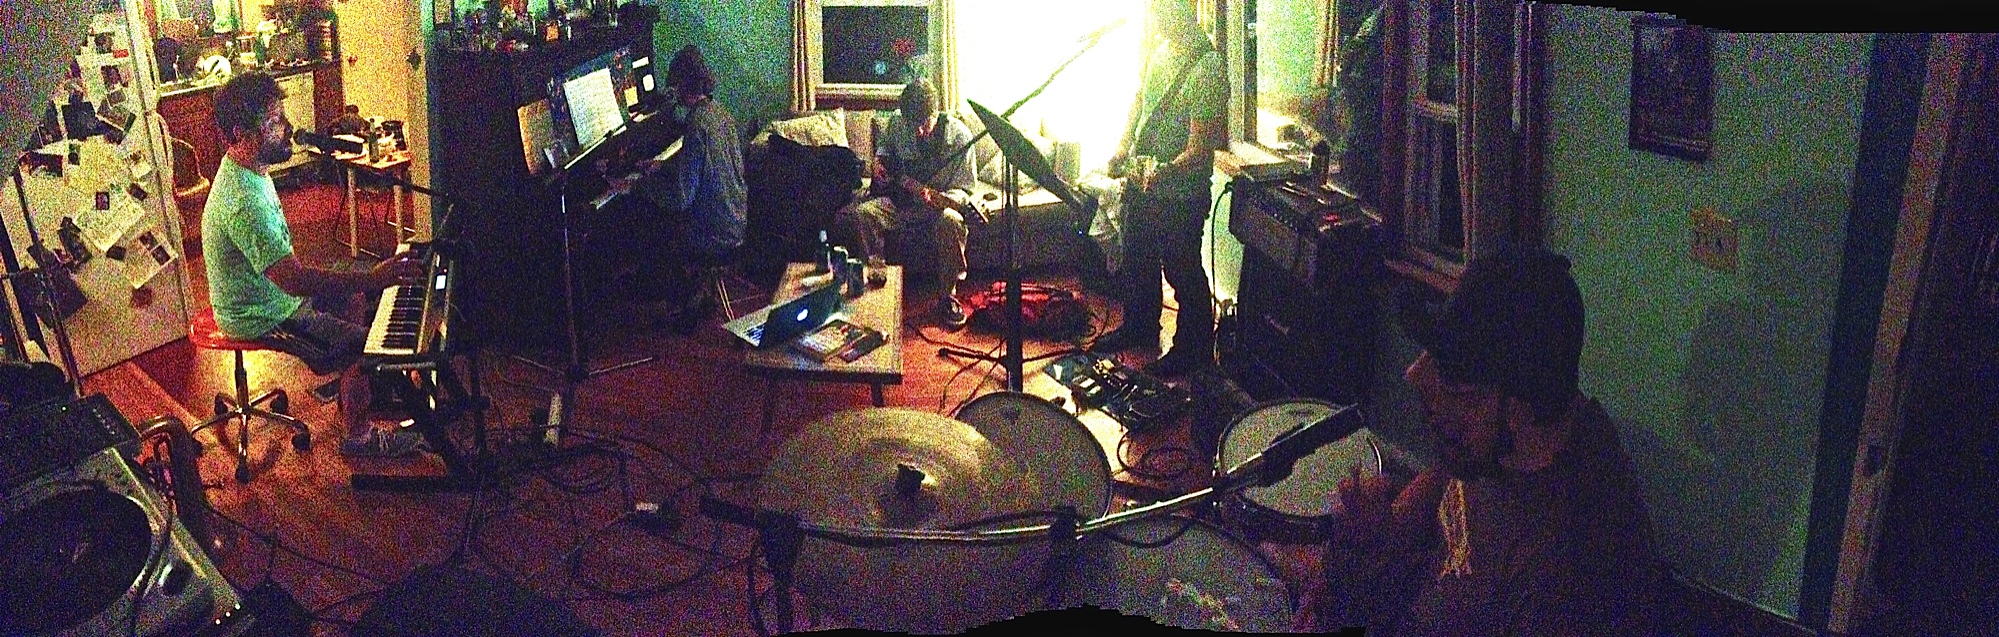 Pragnus Gray Collective prepares for the CD release performance at Adam's house.